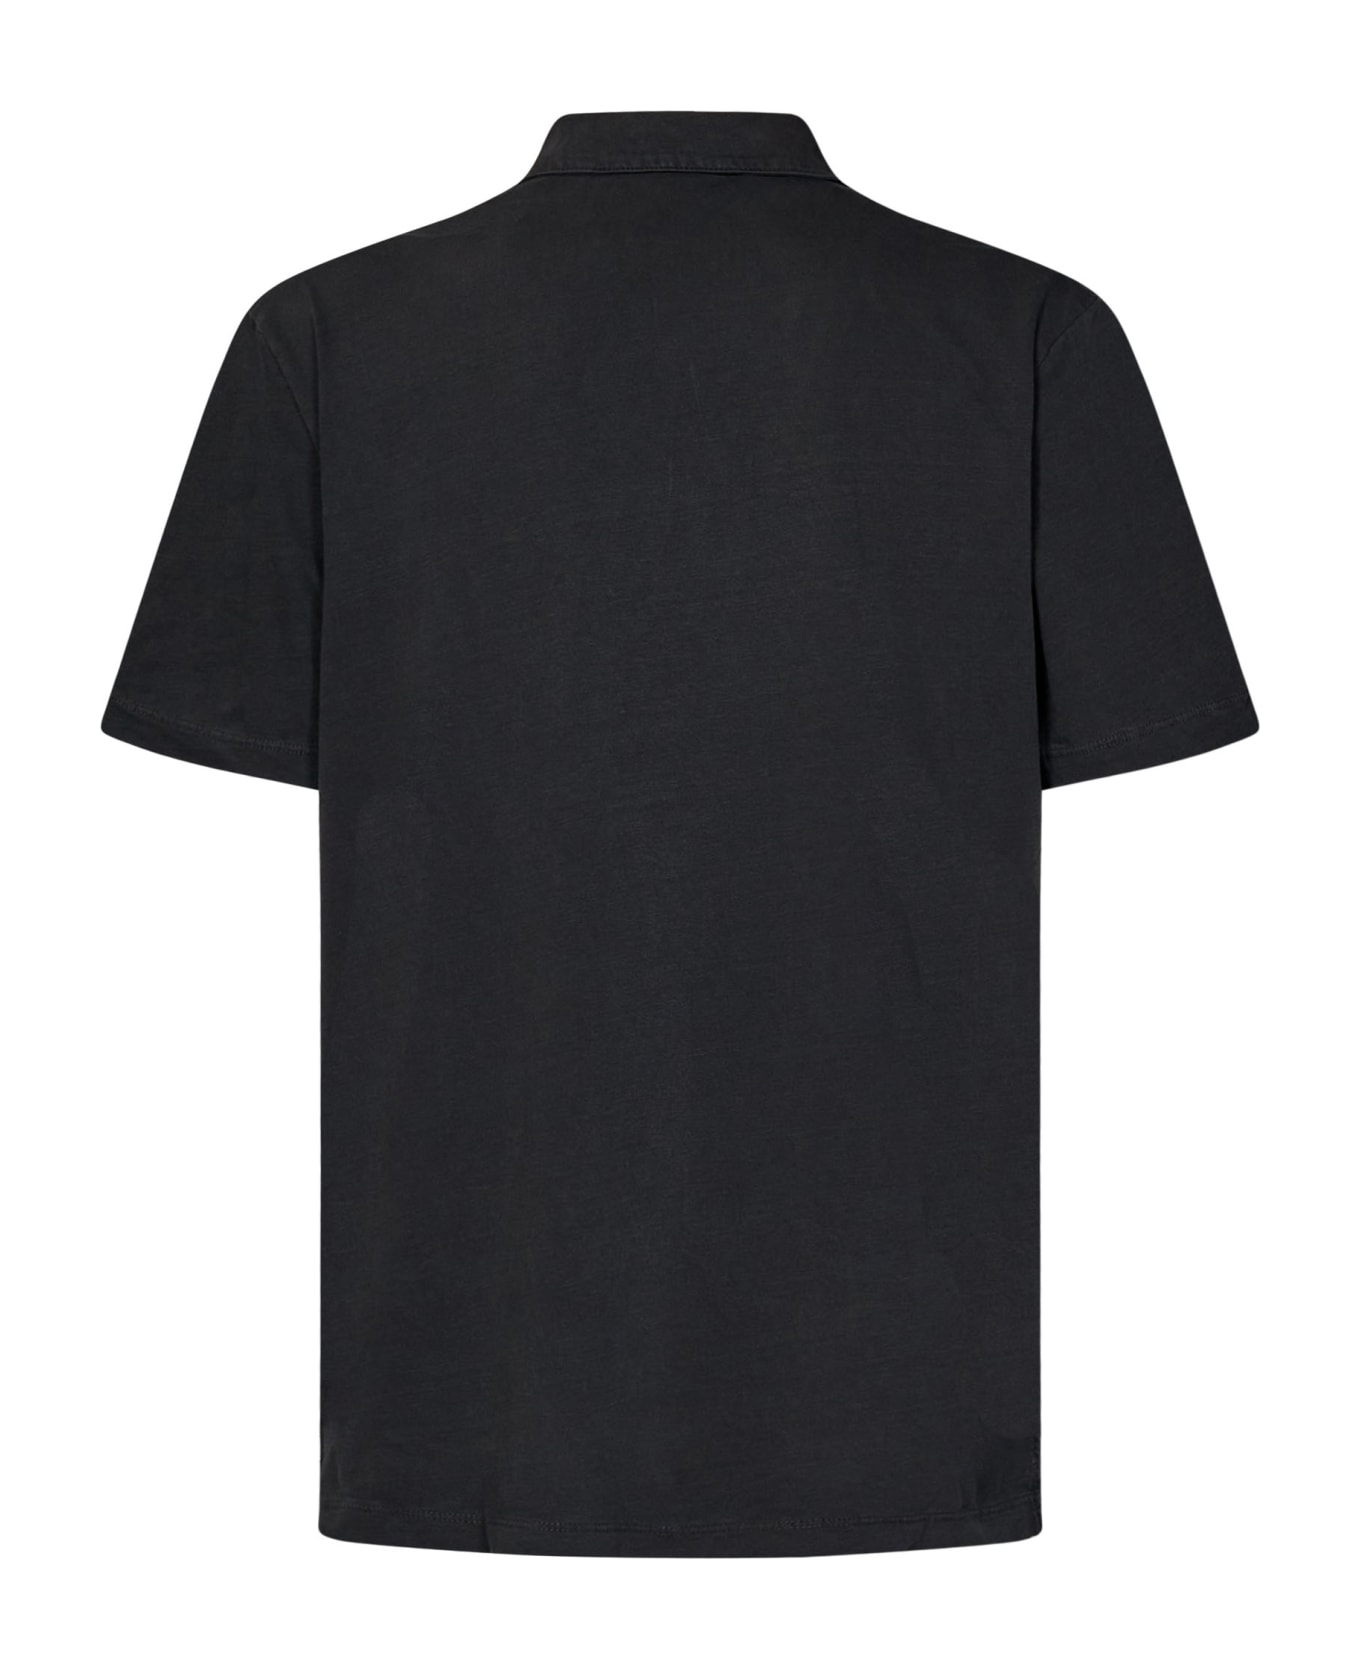 James Perse Polo Shirt - Carbone